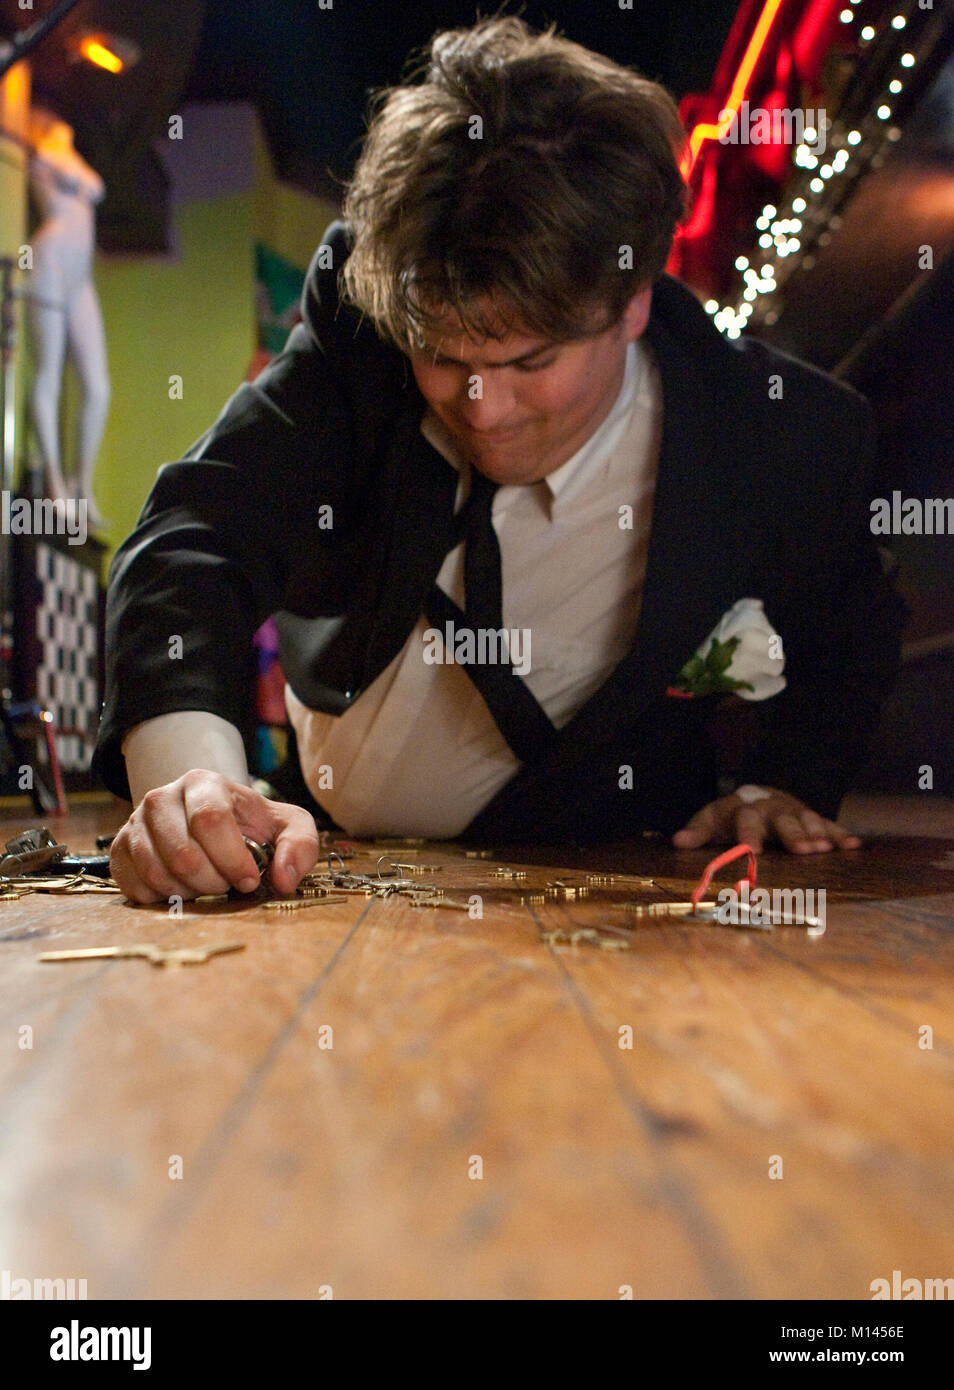 Drunk man on the bar floor, looking for his keys. Stock Photo